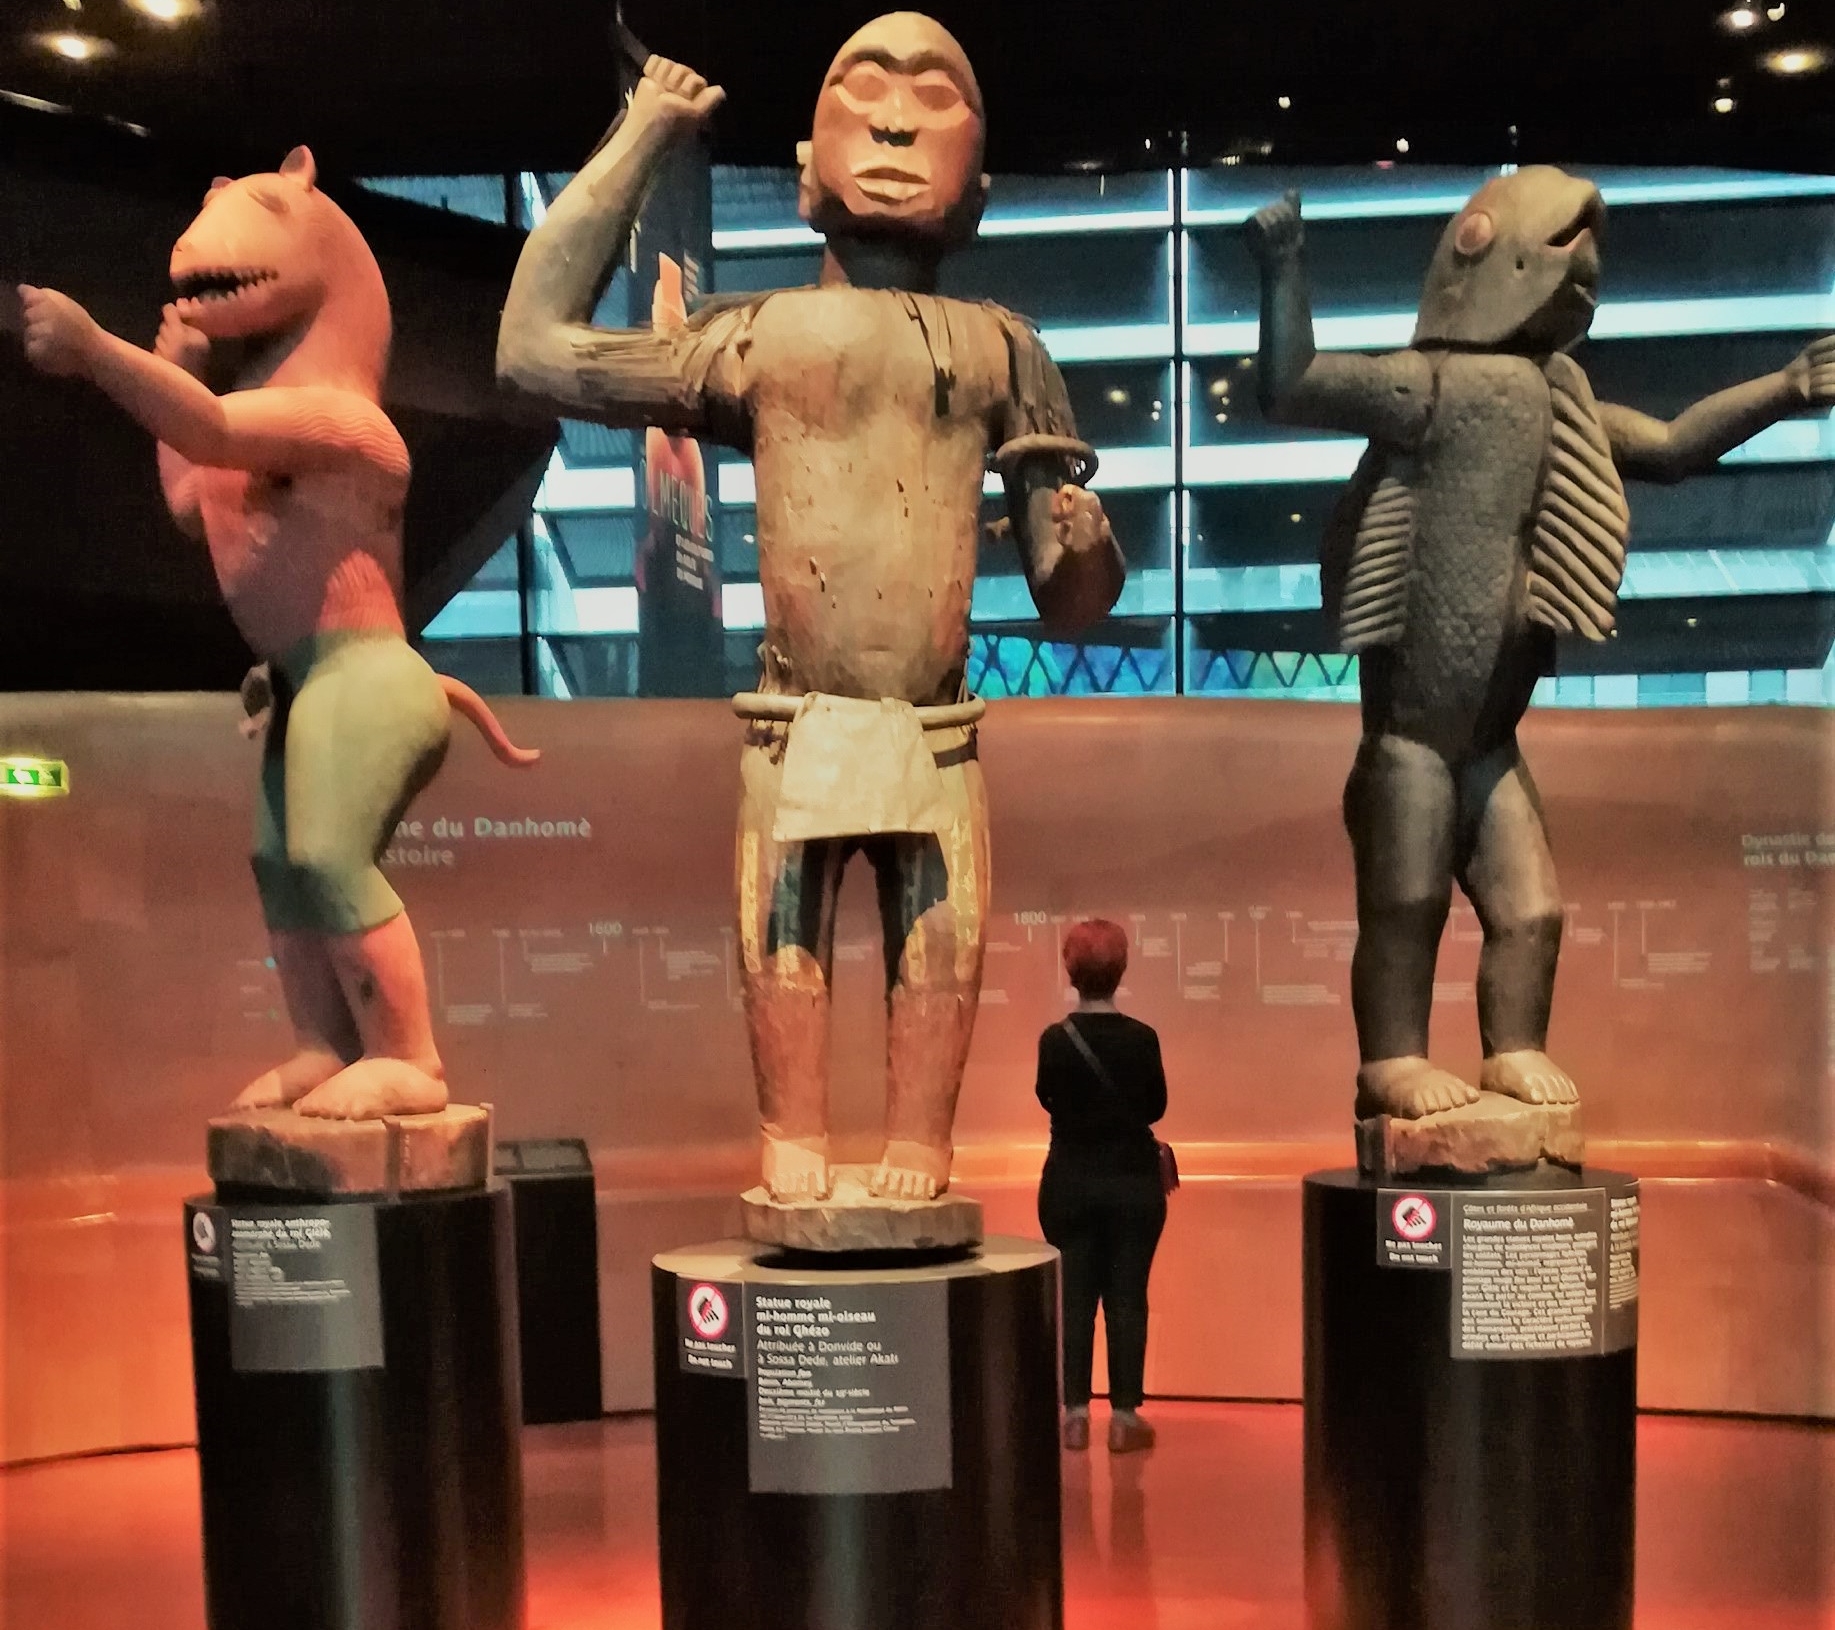 Royal statues of Dahomey at the Musée du quai Branly in Paris, France, before their restitution to Benin in late 2021.